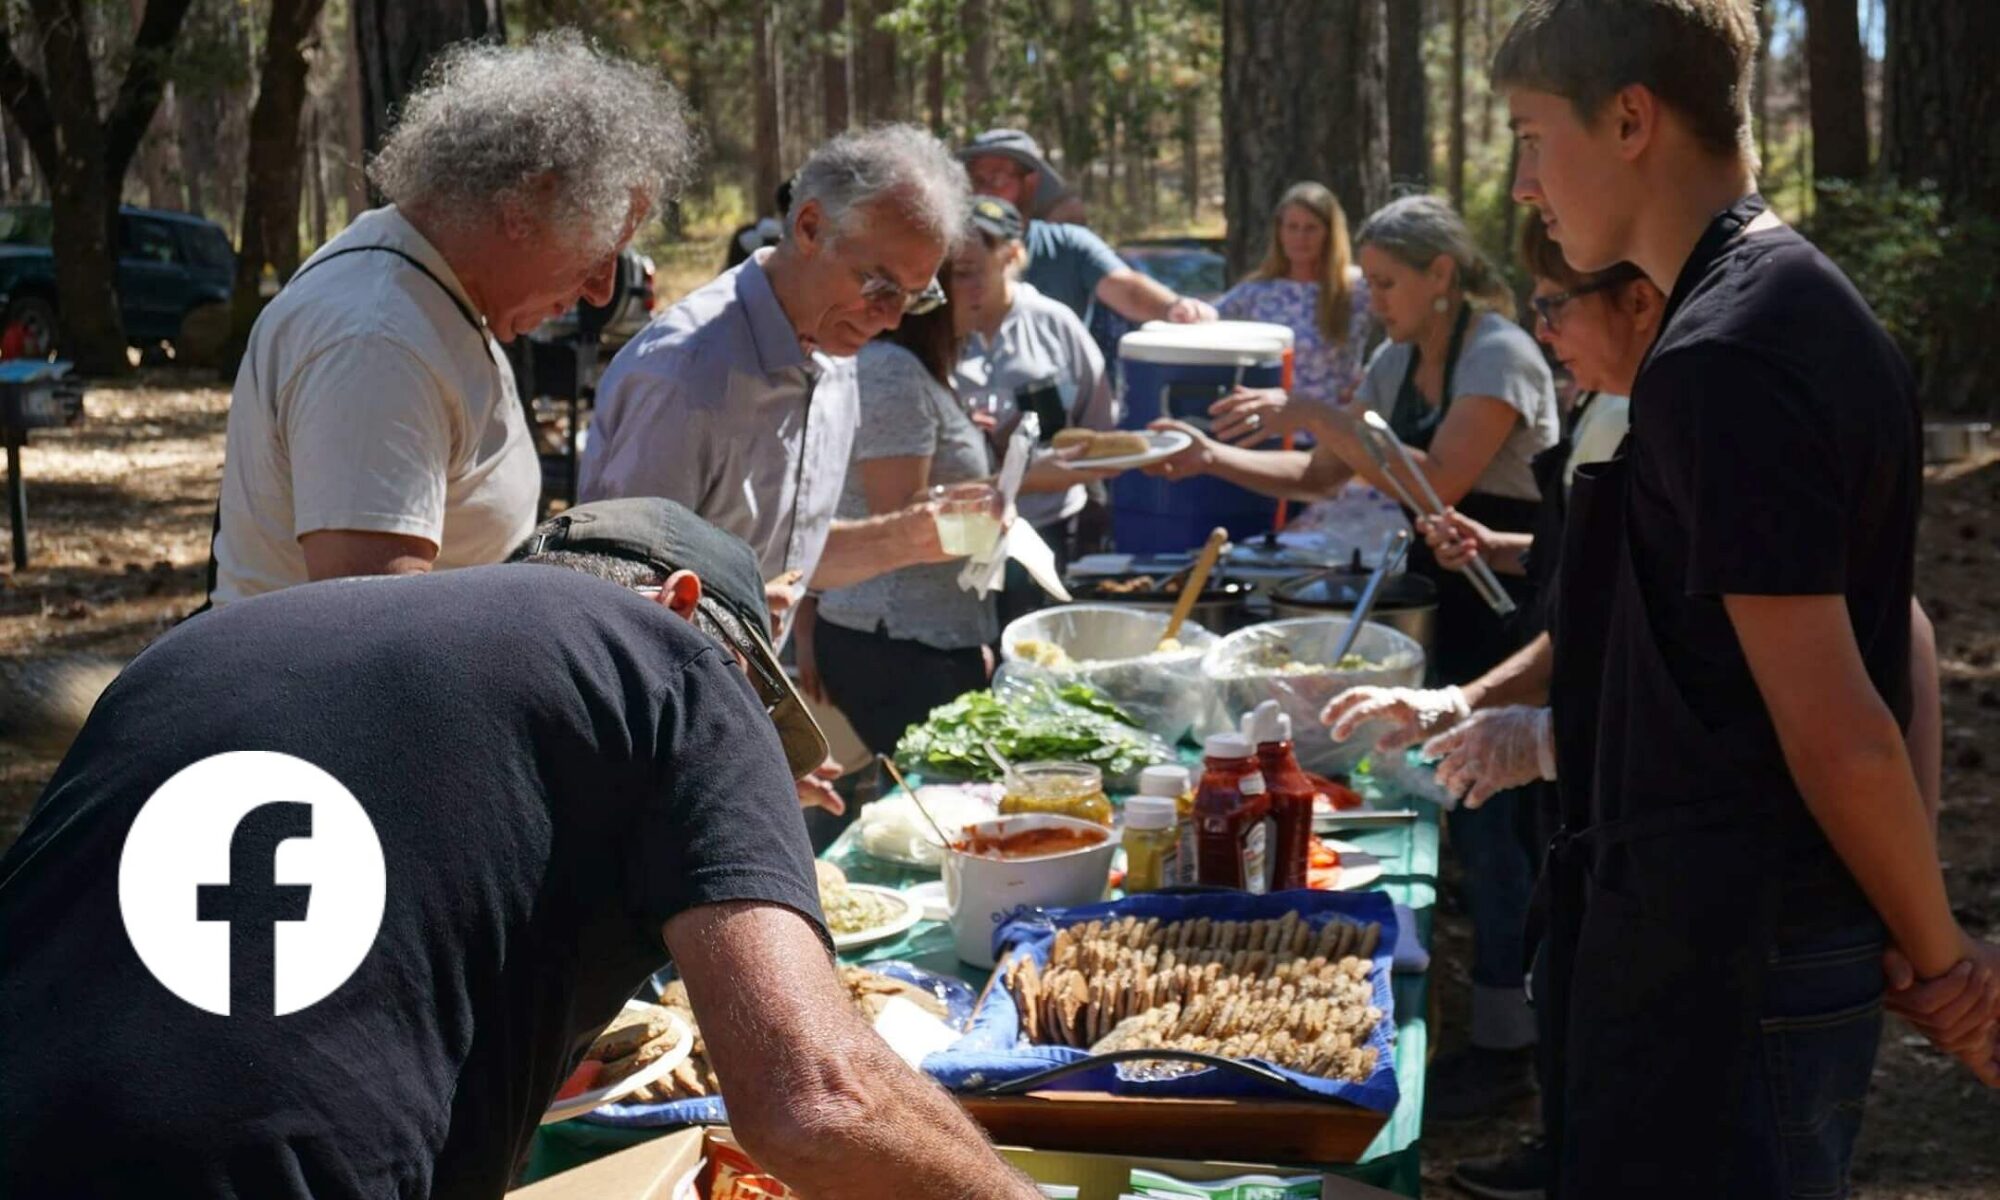 Image of FOBM gathering "feed" at Boggs Mountain Demonstration State Forest